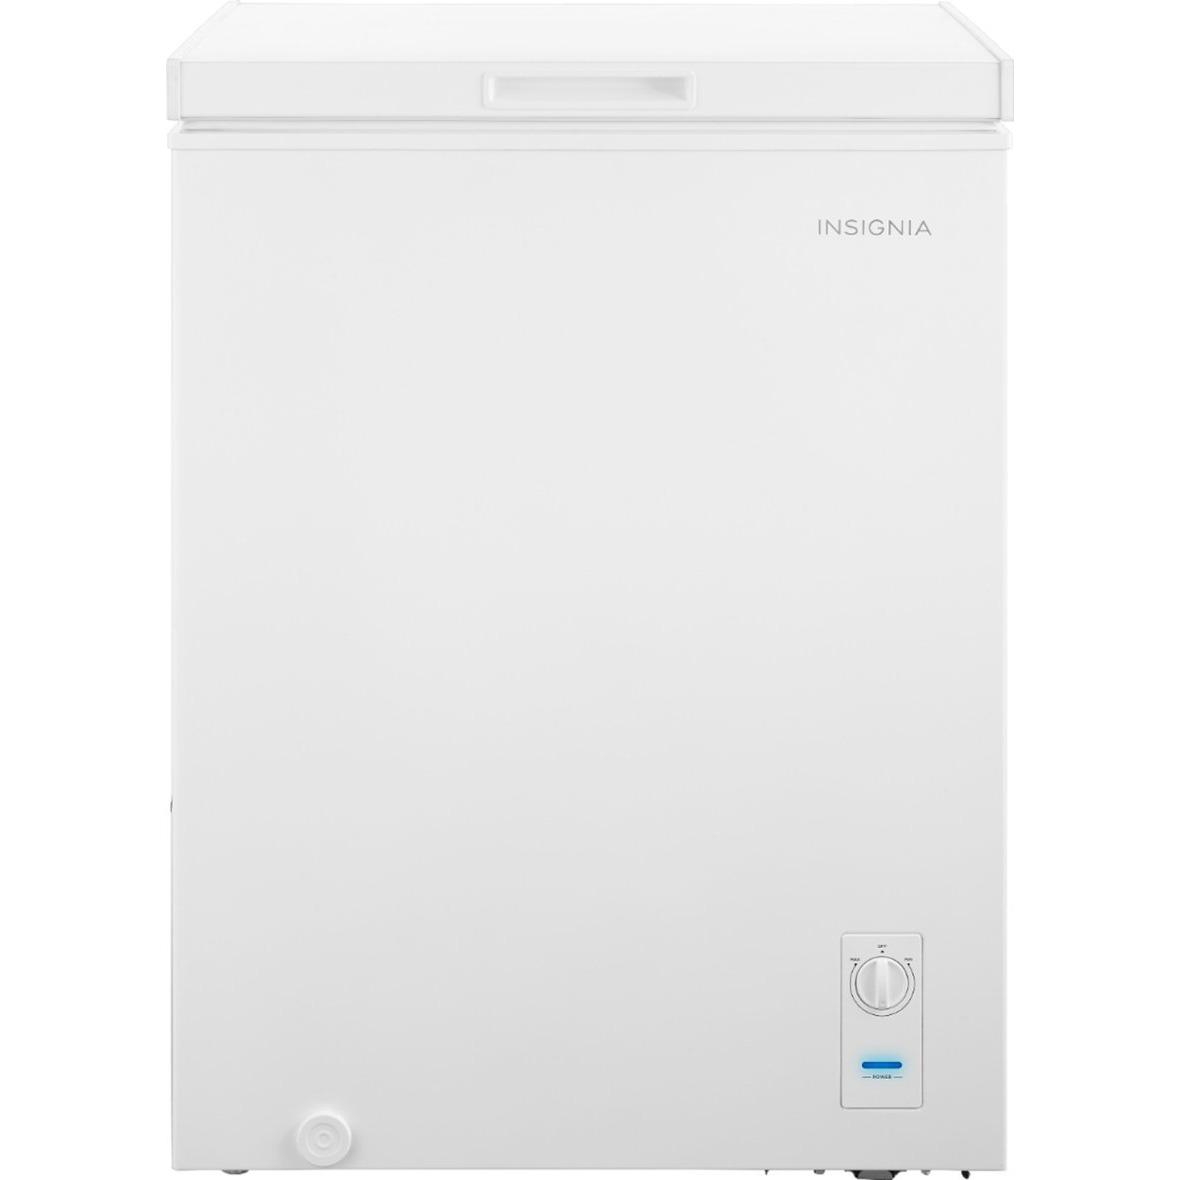 Insignia Garage Ready Chest Freezer for $159.99 Shipped